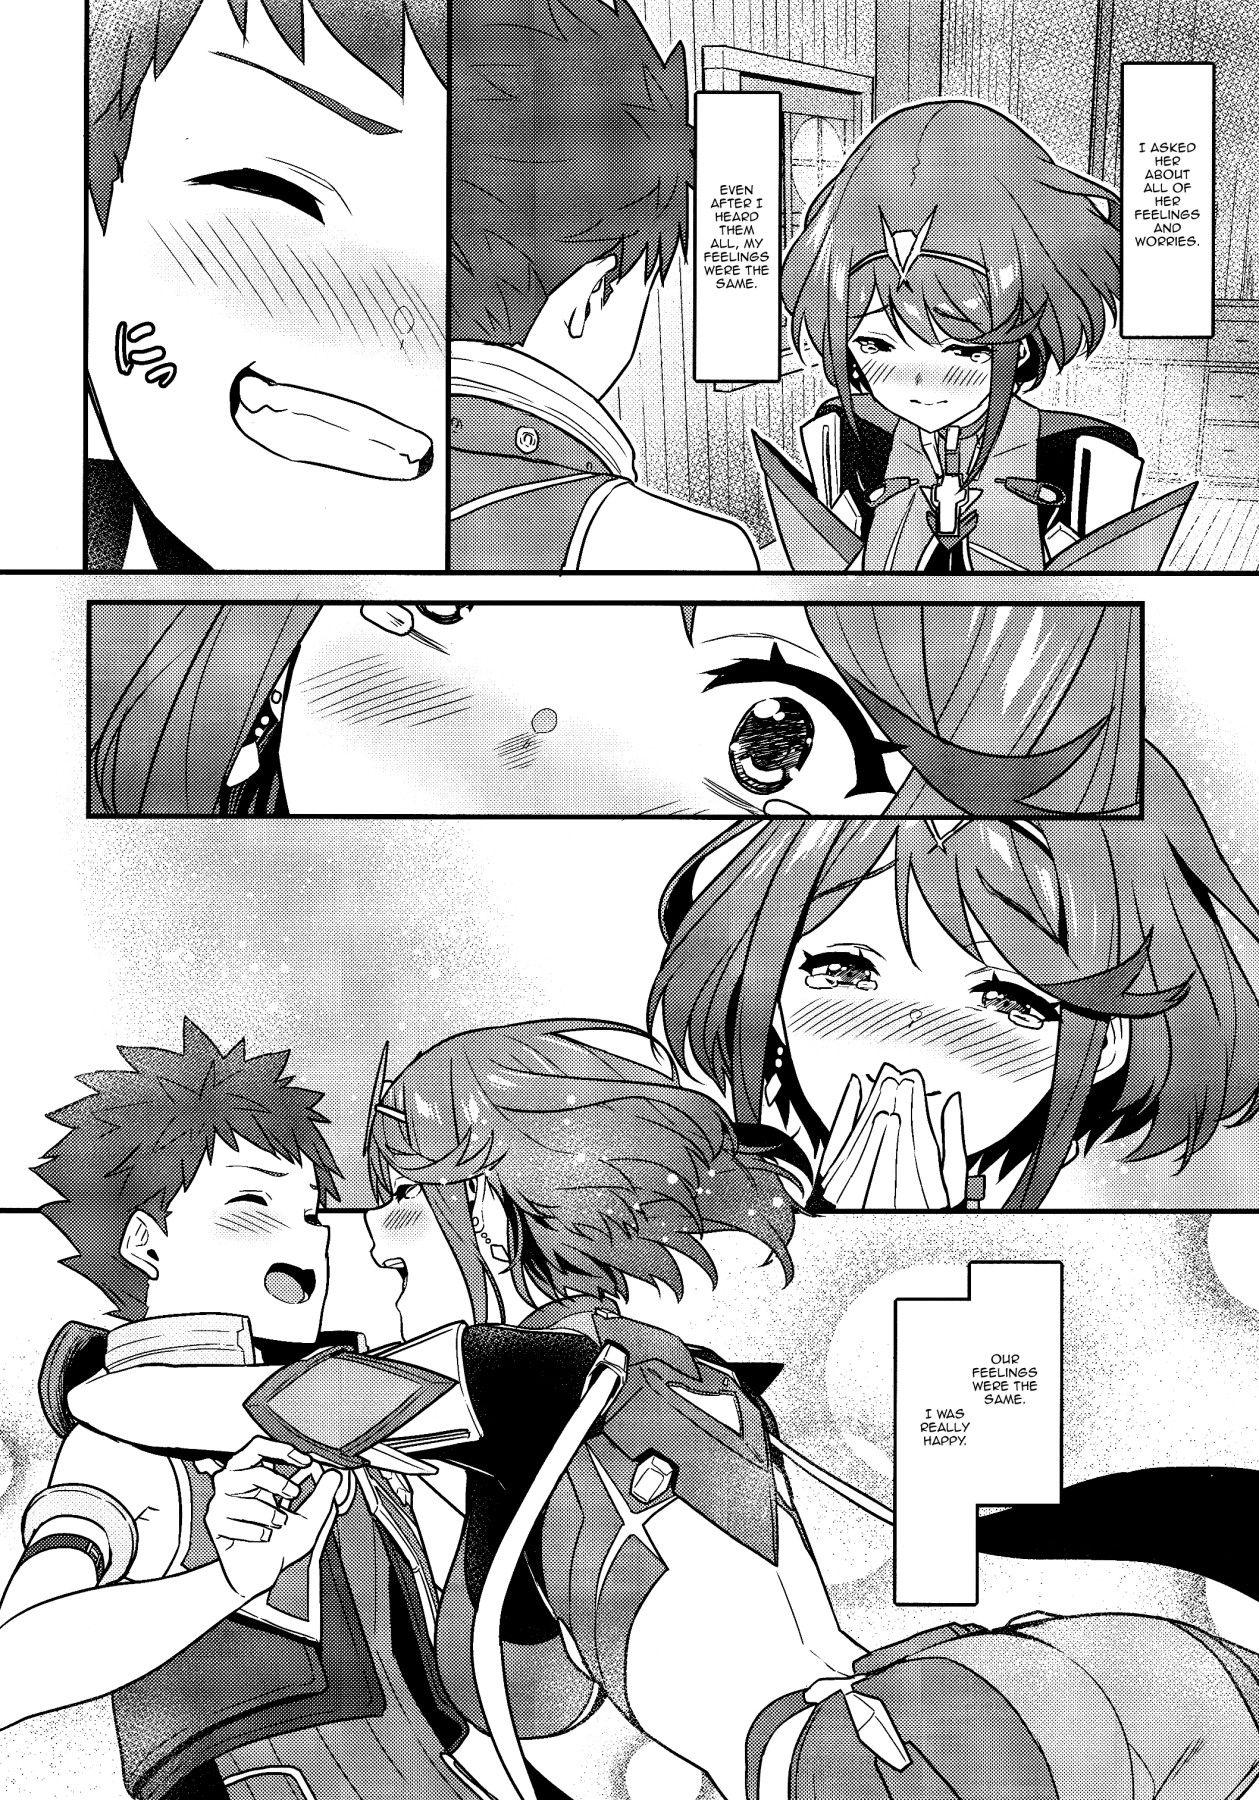 Gay Massage Chouyou no Naka e to | In The Morning Light - Xenoblade chronicles 2 Analplay - Page 5